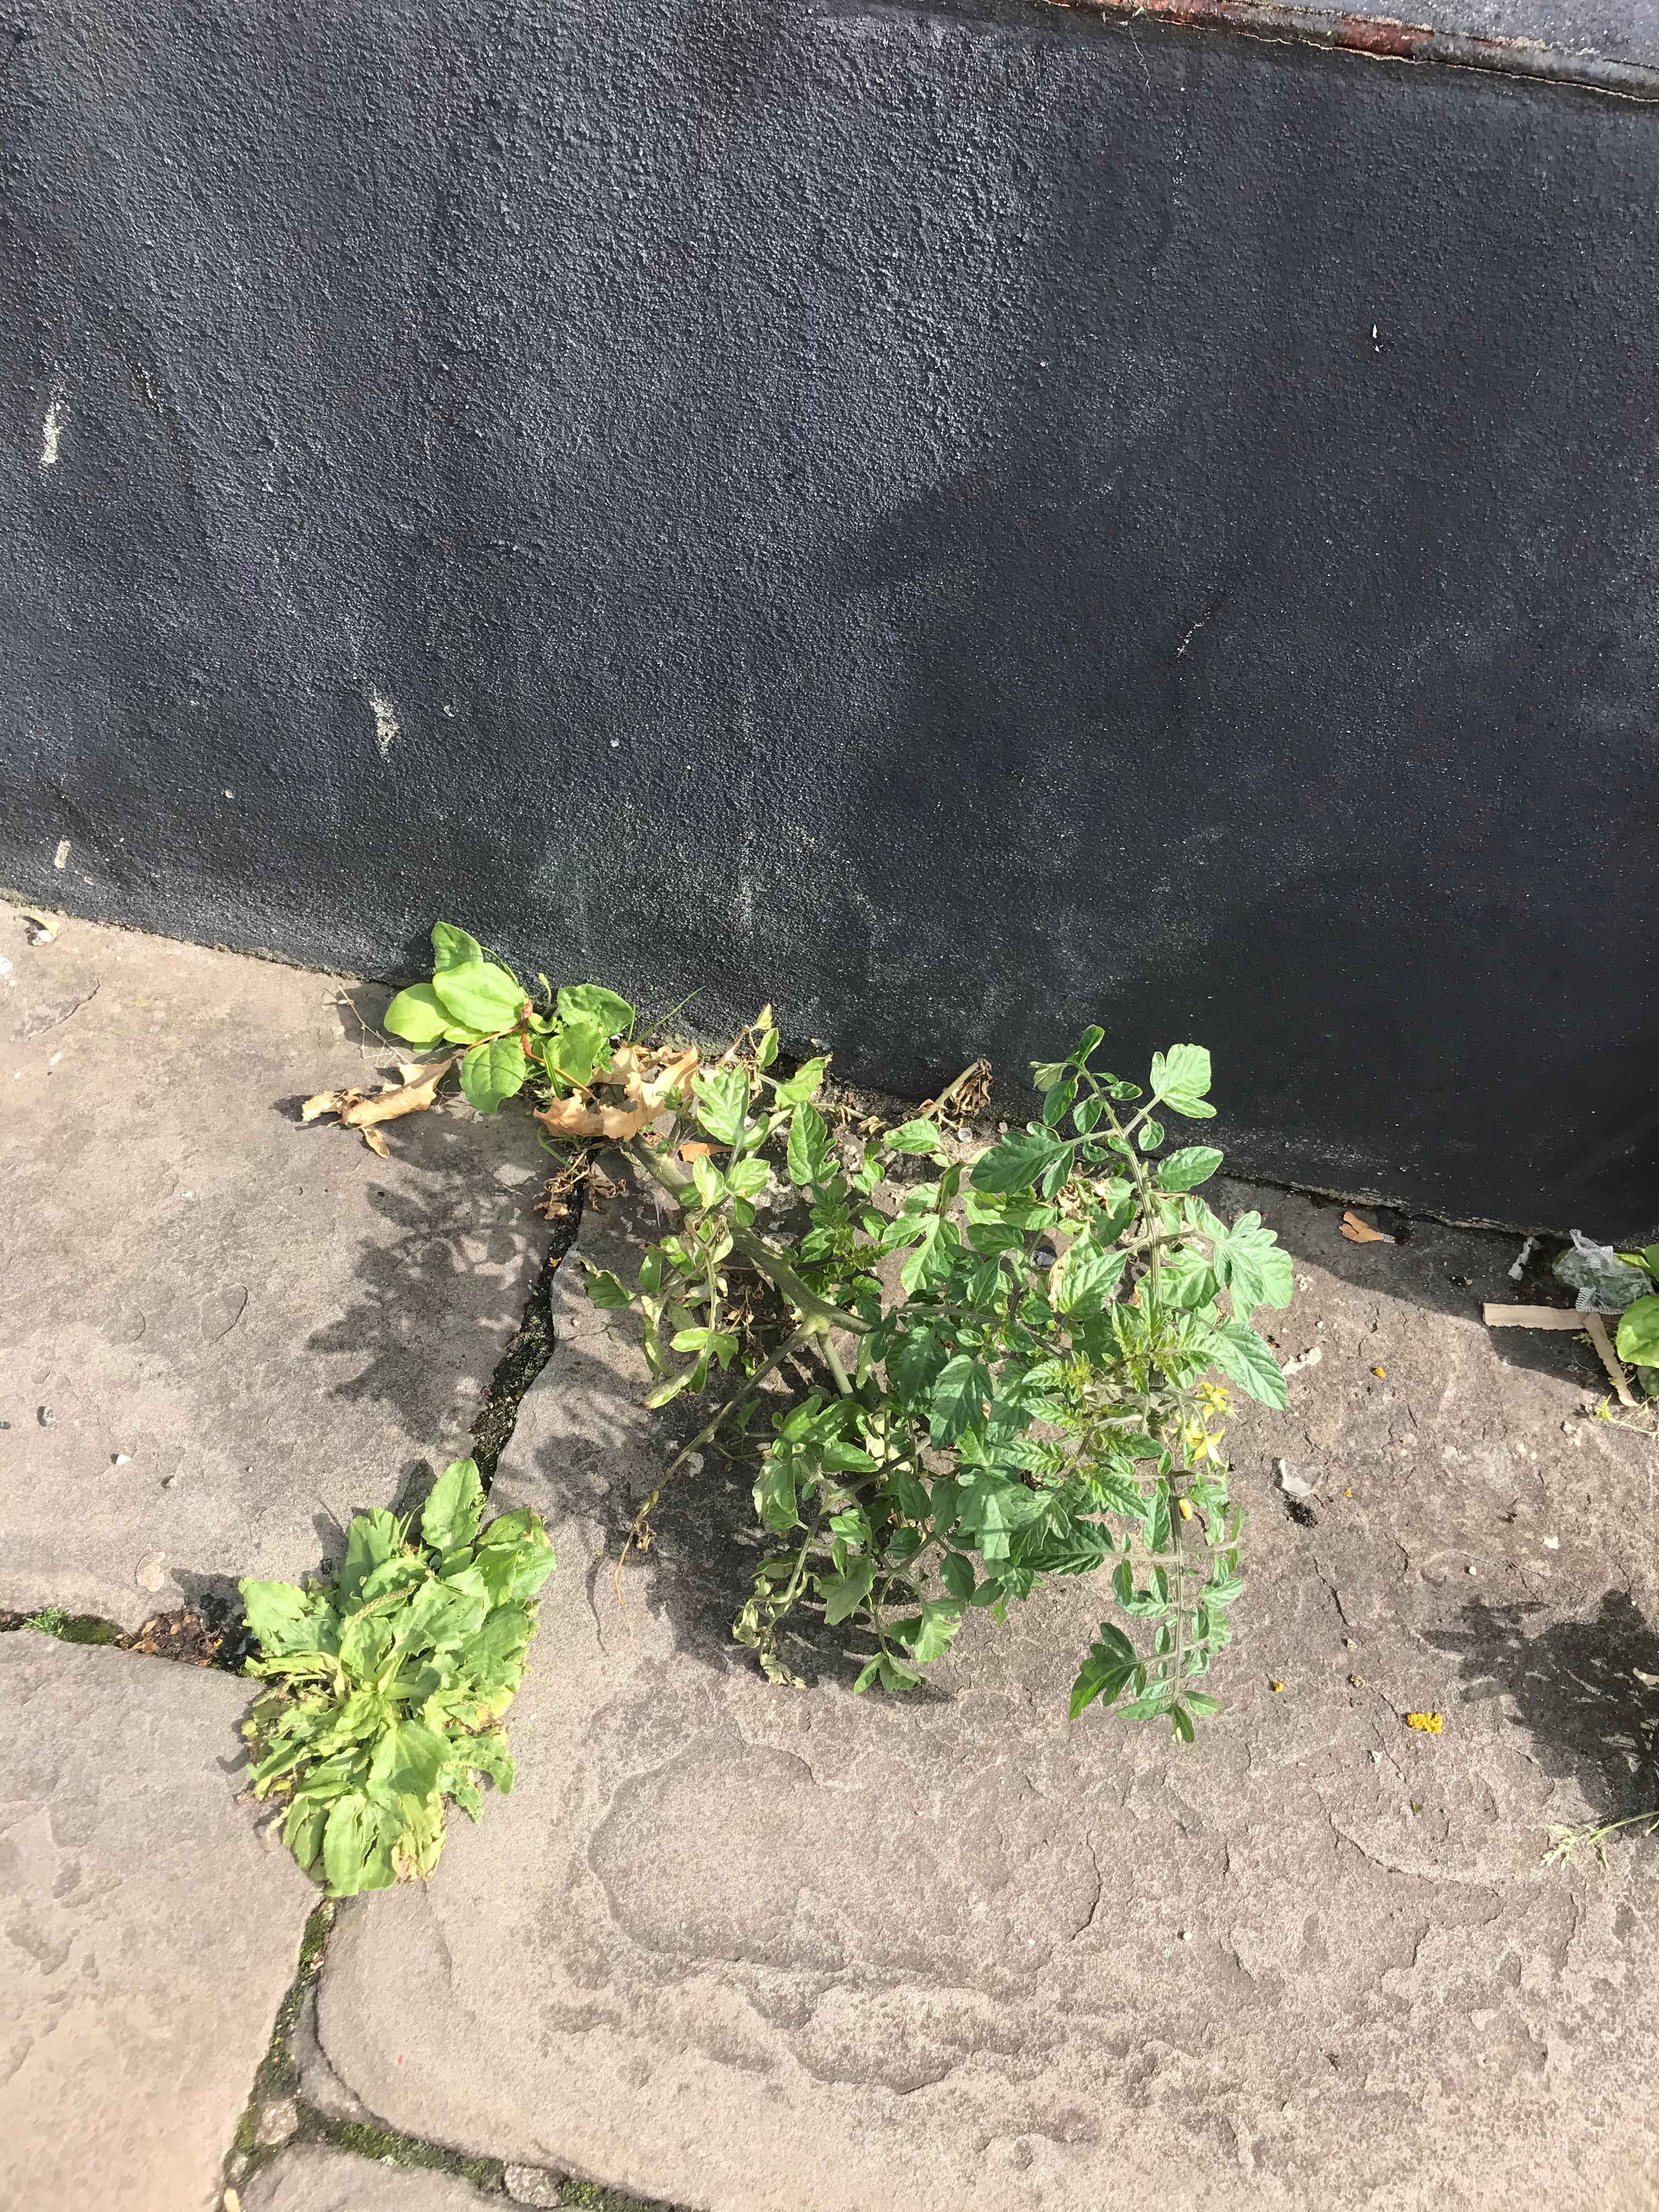 Just a casual tomato plant growing out of a sidewalk near ...